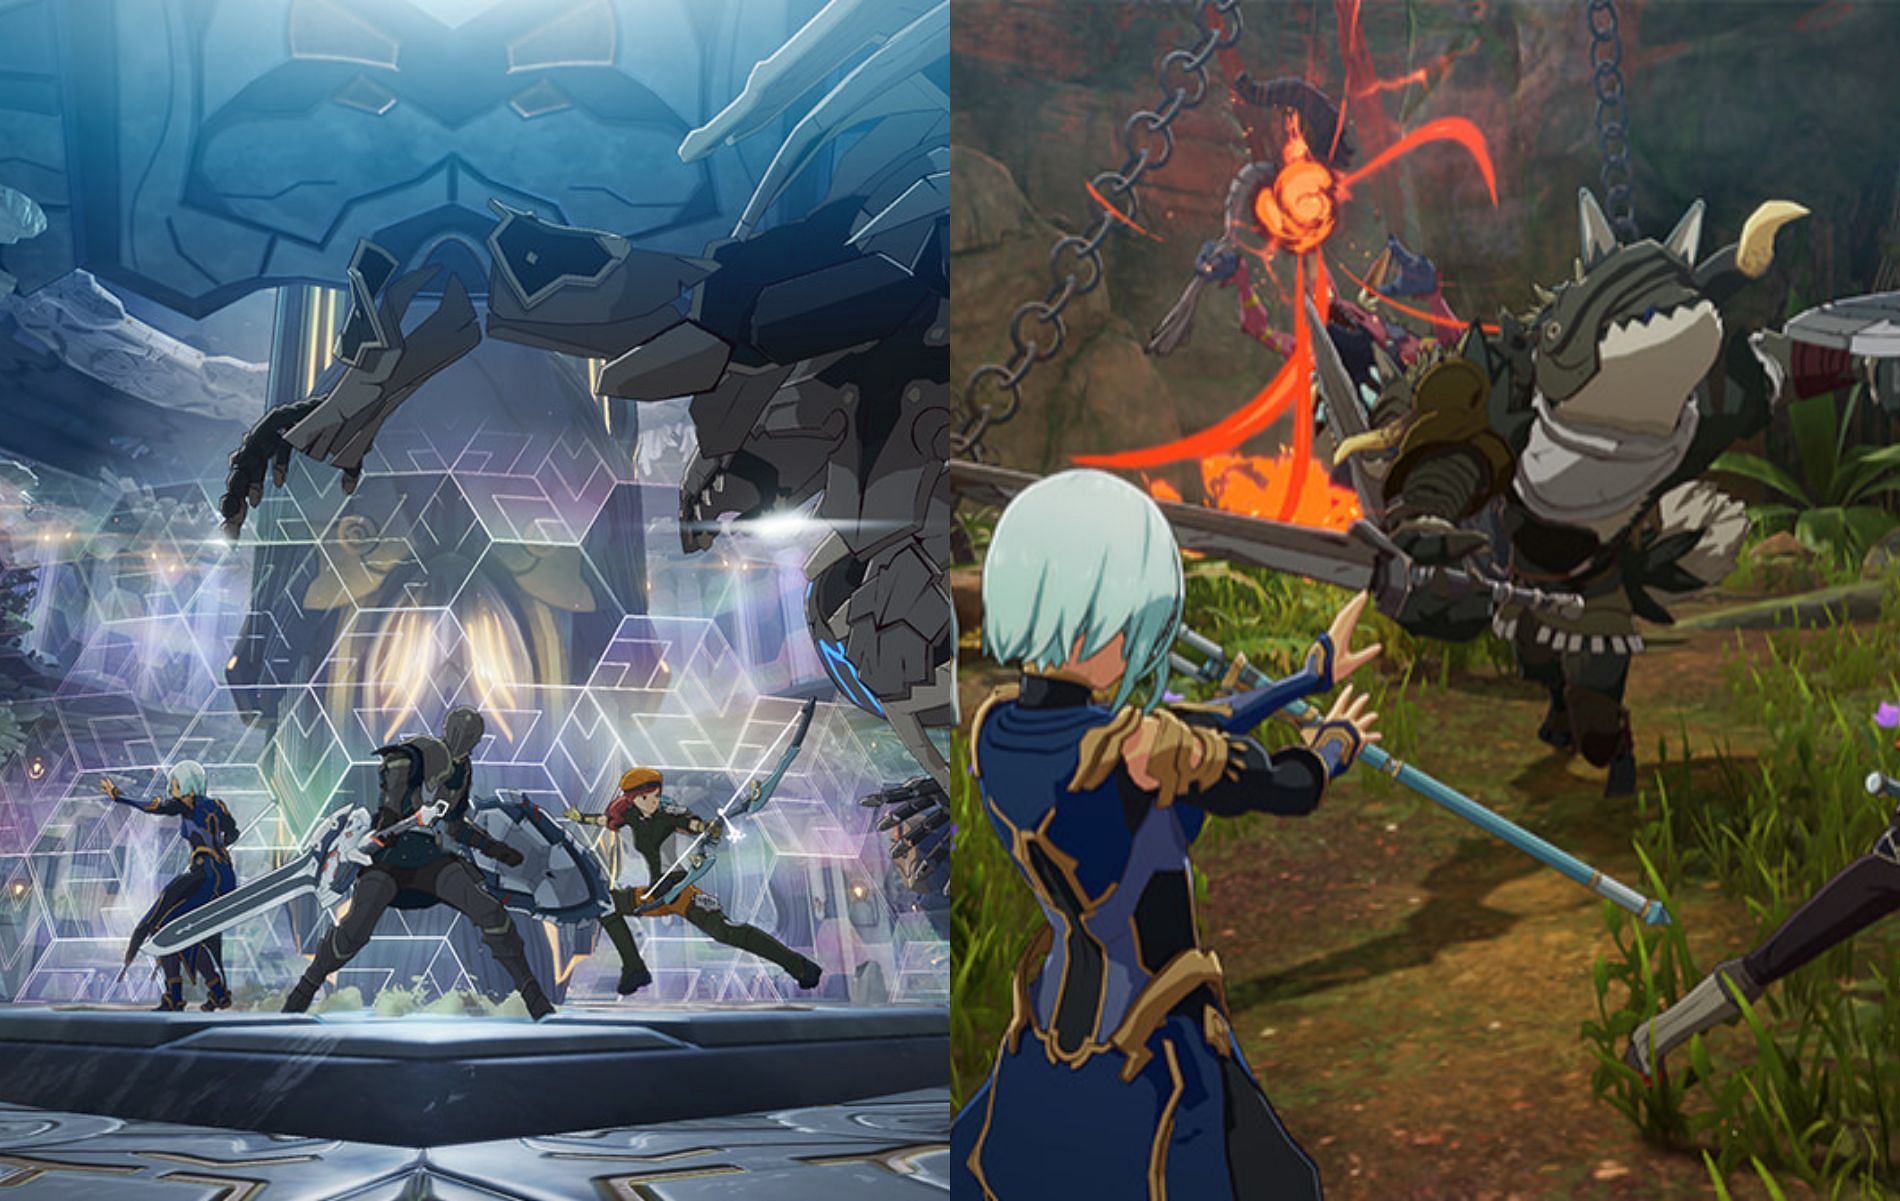 Blue Protocol is  and Bandai Namco's new action RPG, and